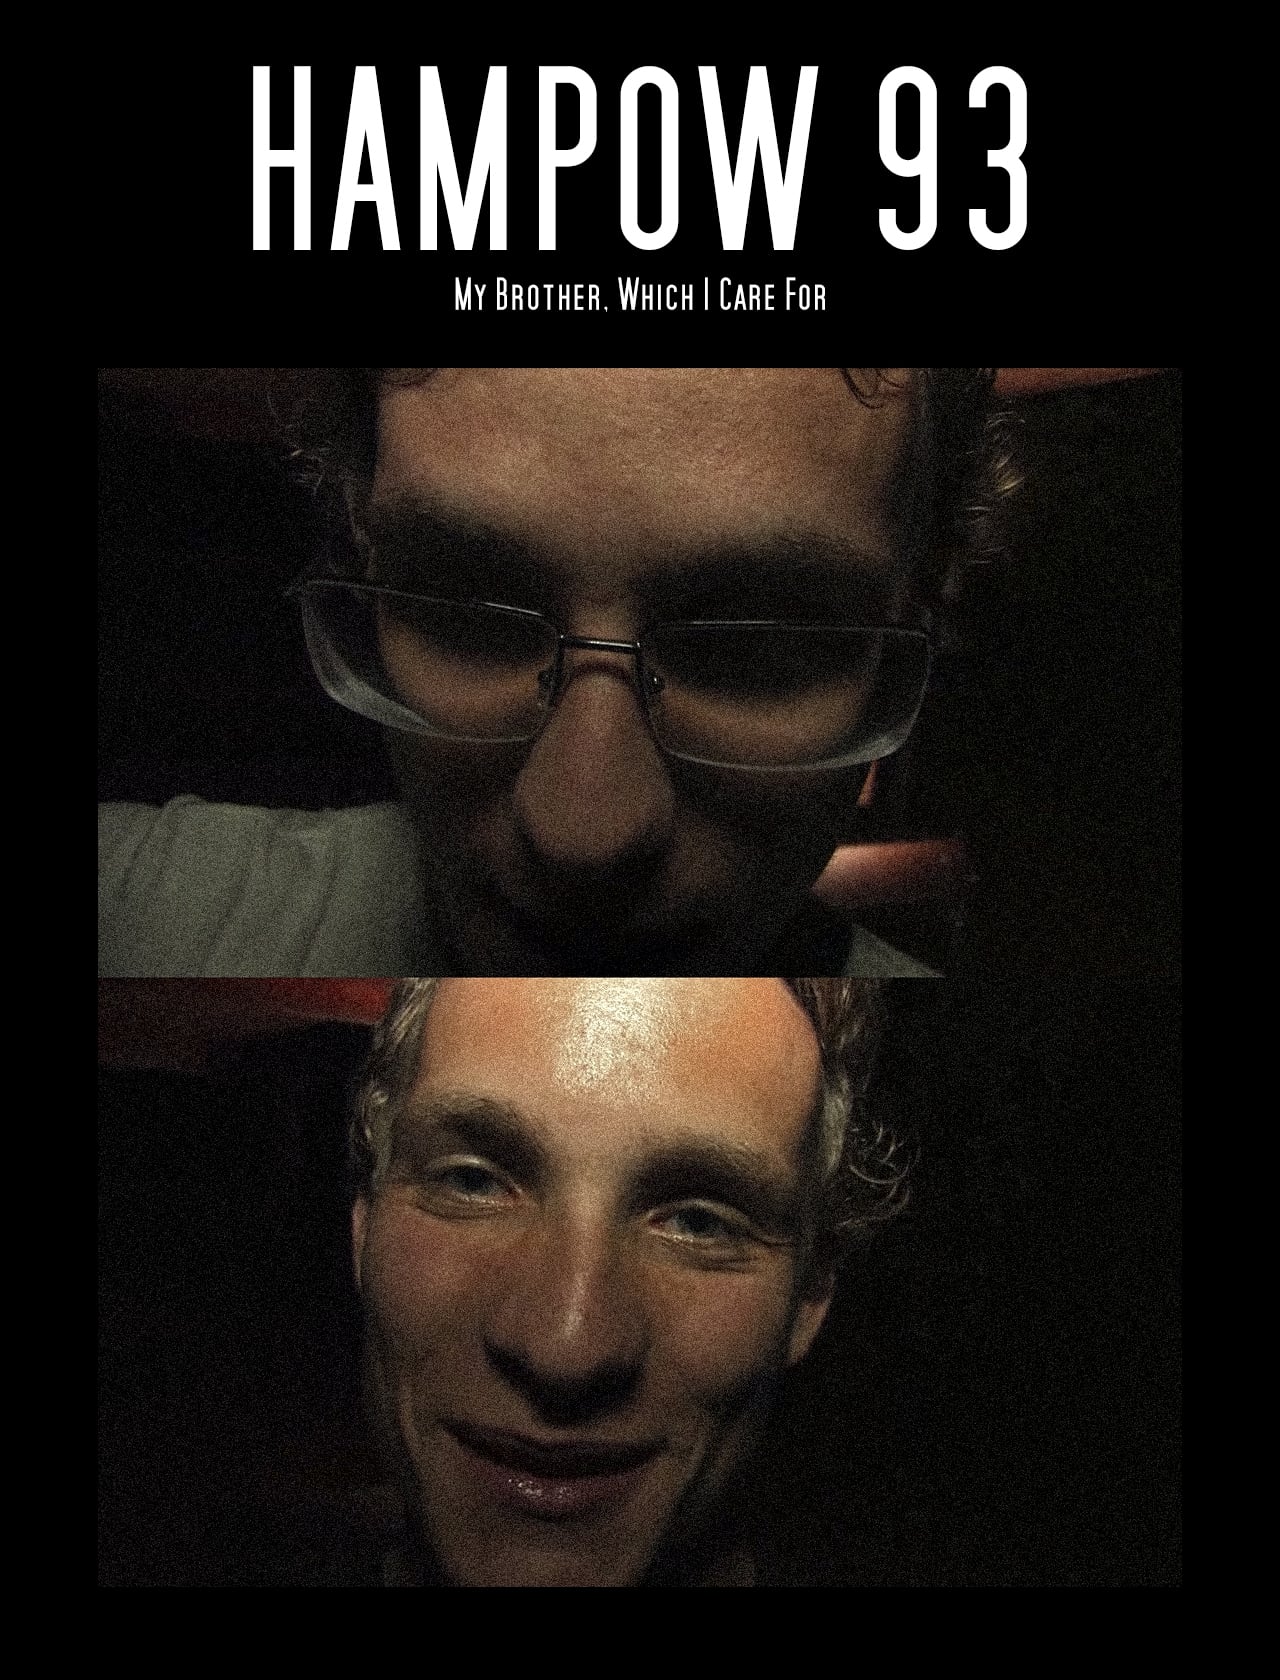 Hampow93: My Brother, Which I Care For